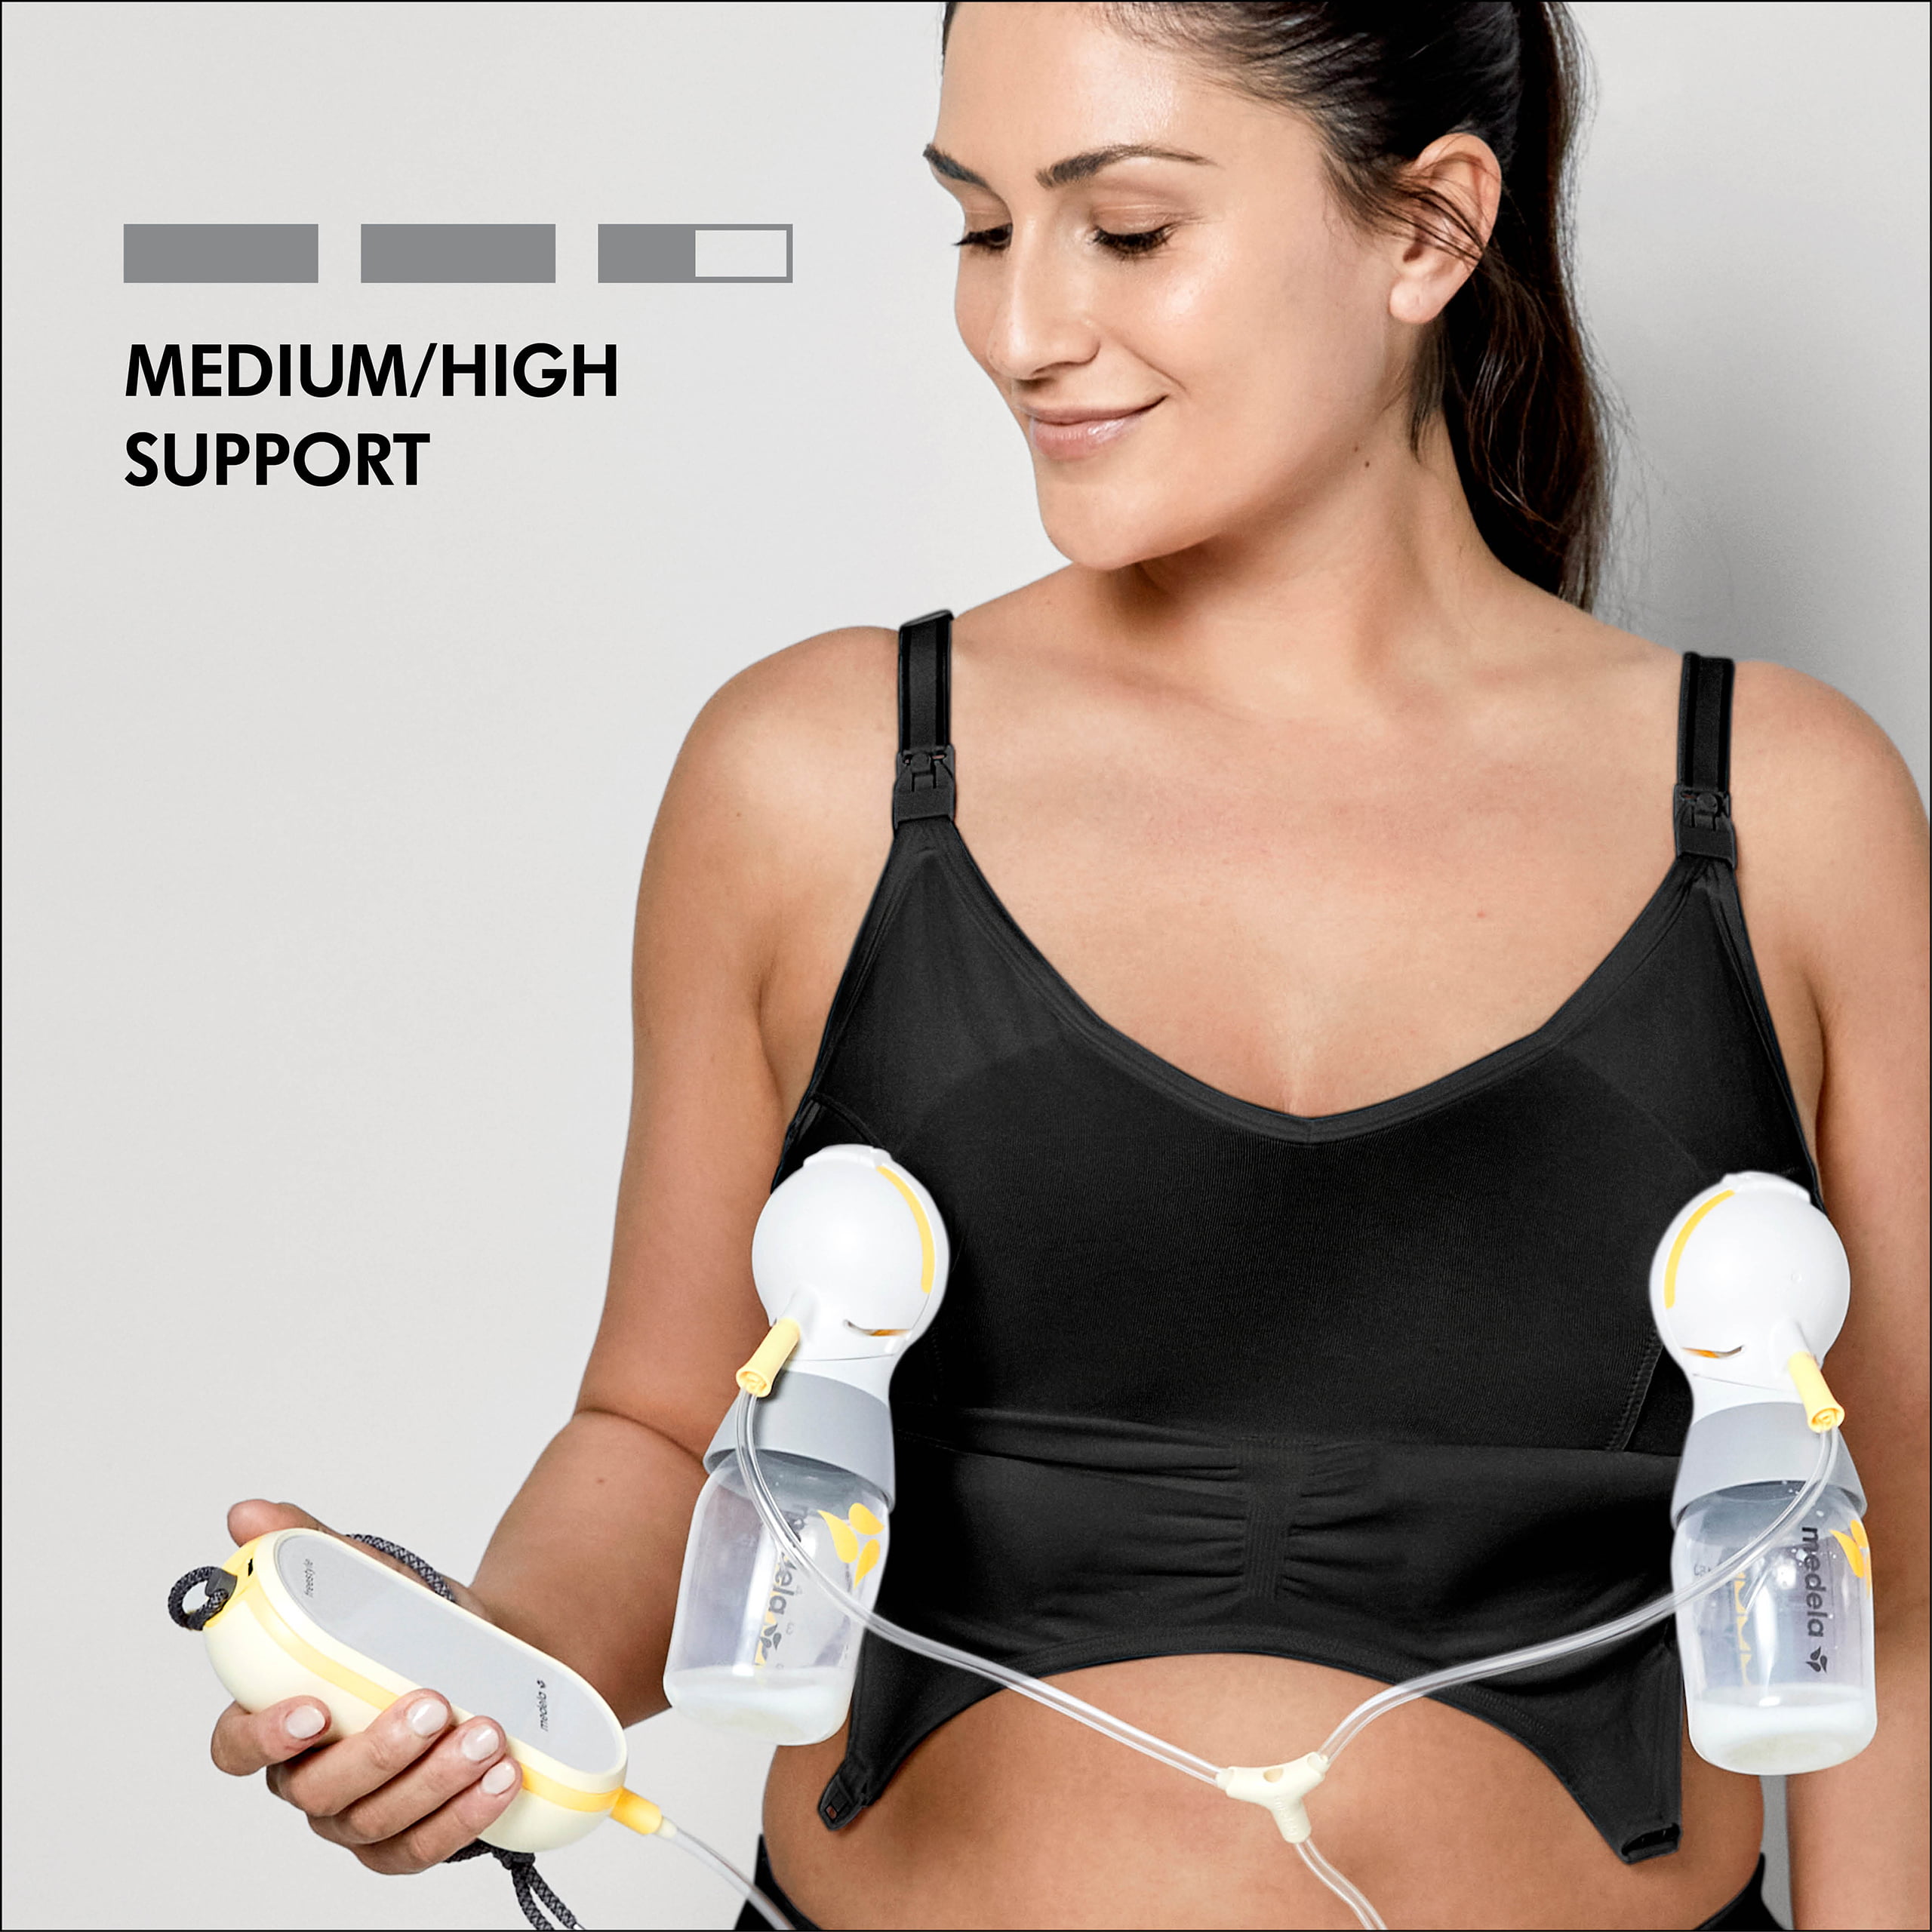 Breastfeeding and Pumping 3 in 1 Bra - SweetCare United States